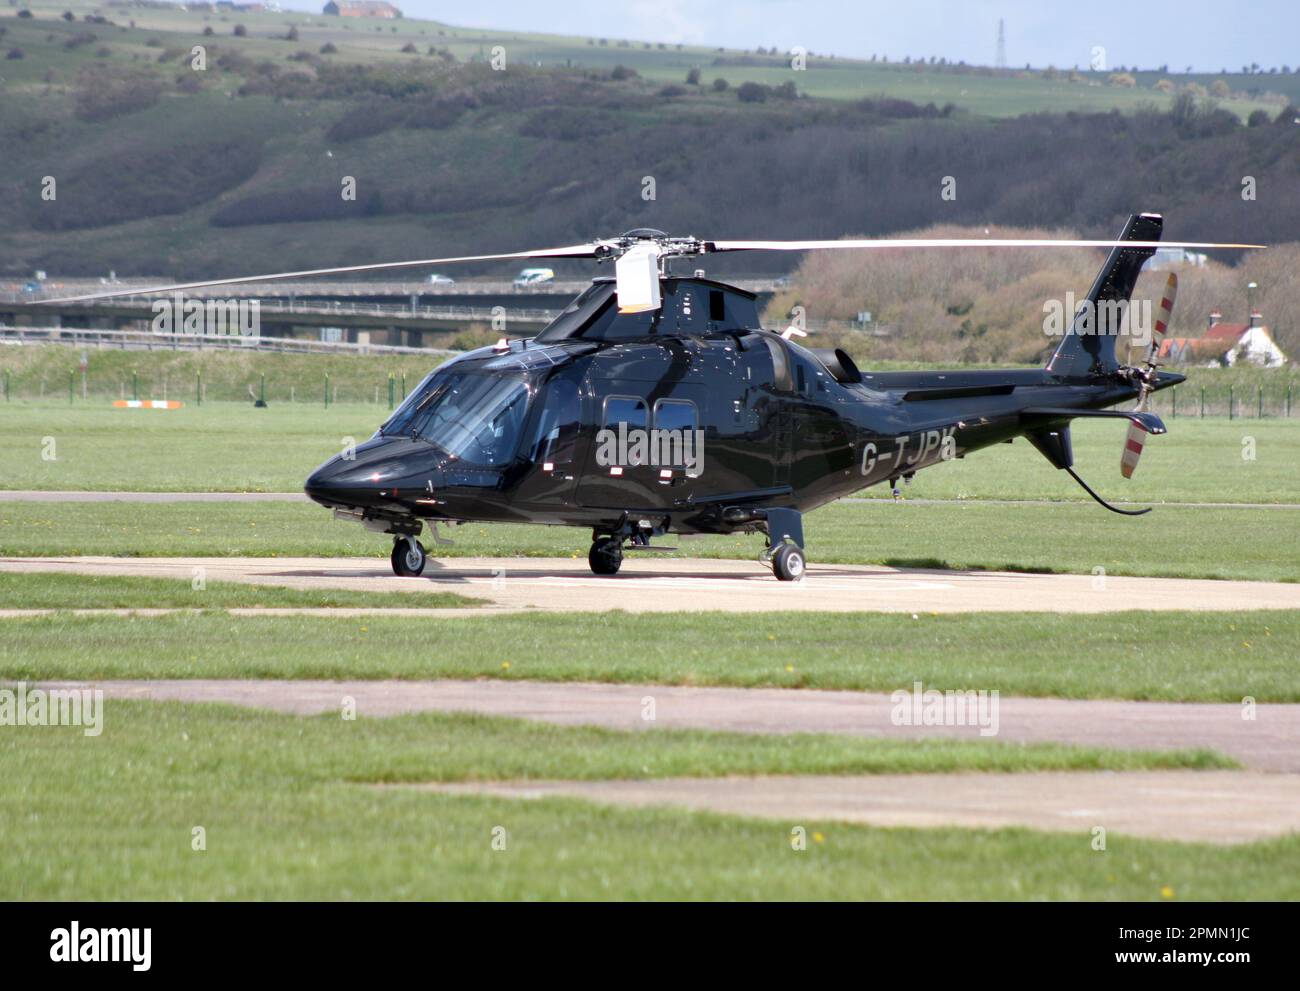 An Agusta-Westland AW-109SP helicopter at Brighton City Airport Shoreham UK Stock Photo